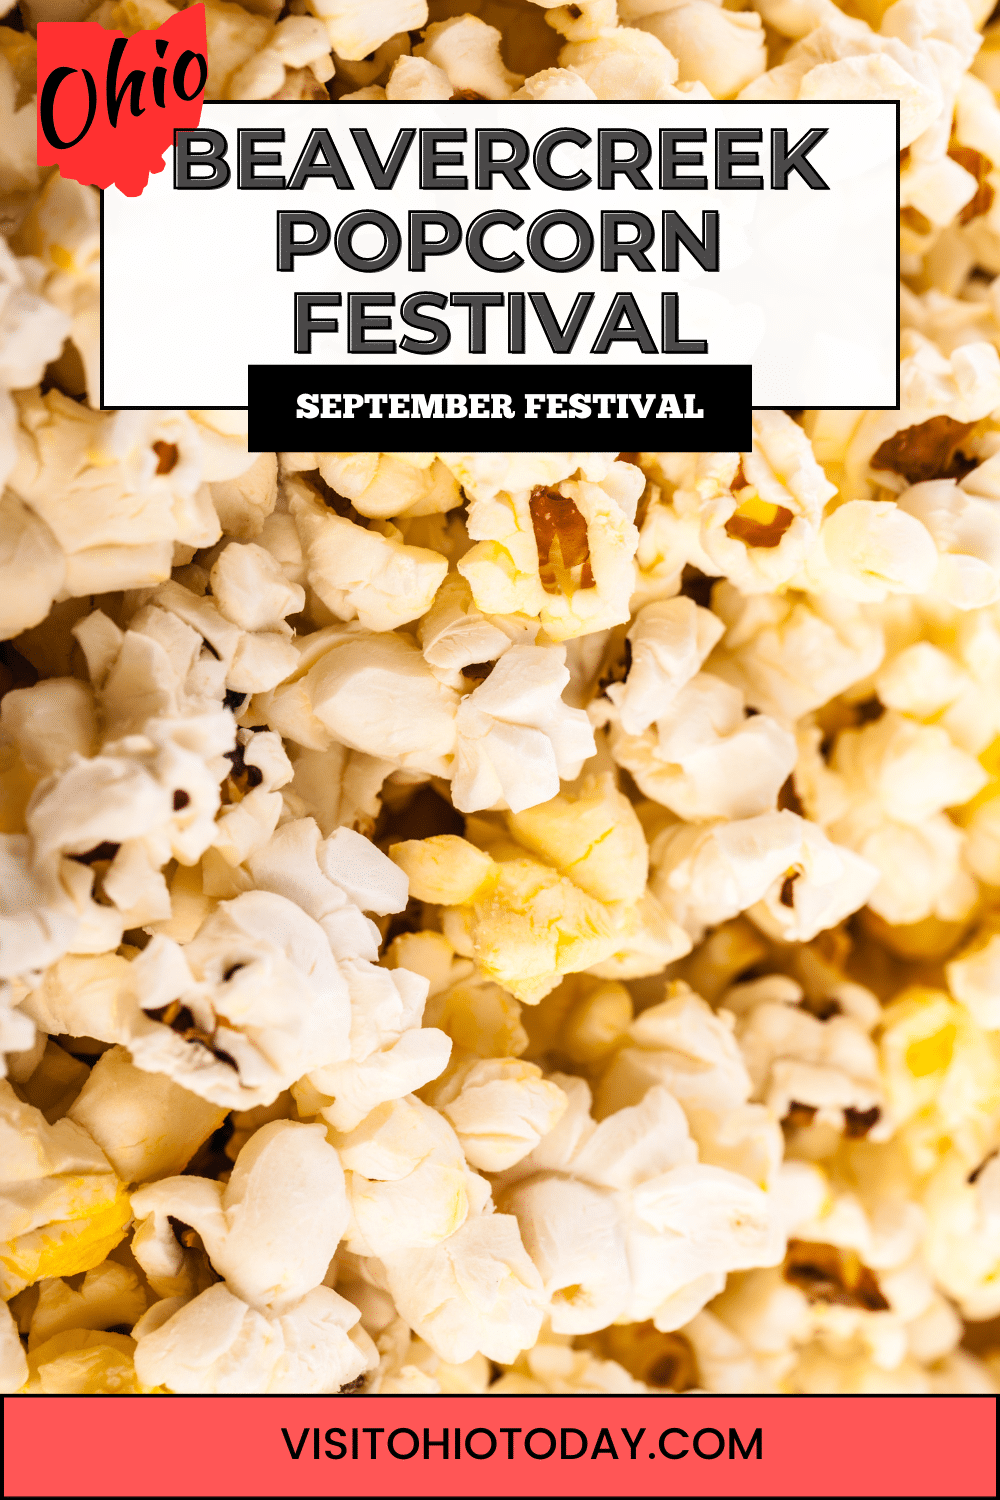 The Beavercreek Popcorn Festival is held on the weekend after Labor Day in Beavercreek. There are two days of great activities and events for all the family to enjoy!